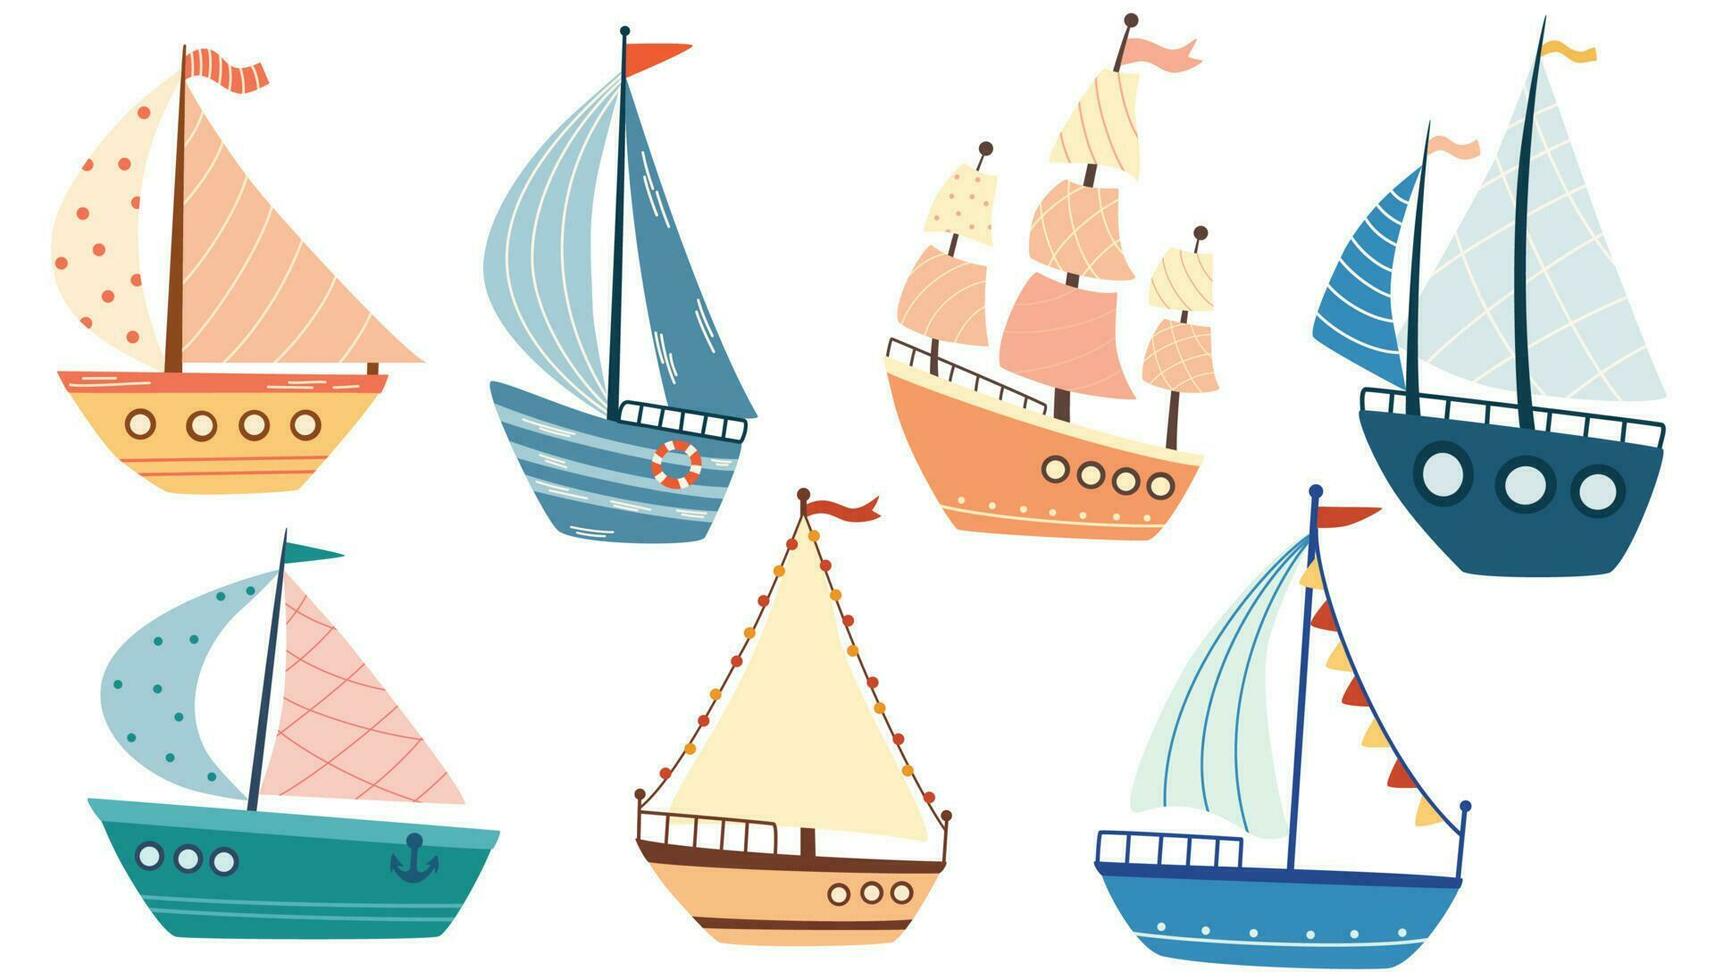 Ships and sailboats set. Isolated cartoon vintage wooden sail boat ship icon collection. Vector old nautical sailboat vessel and ocean travel concept